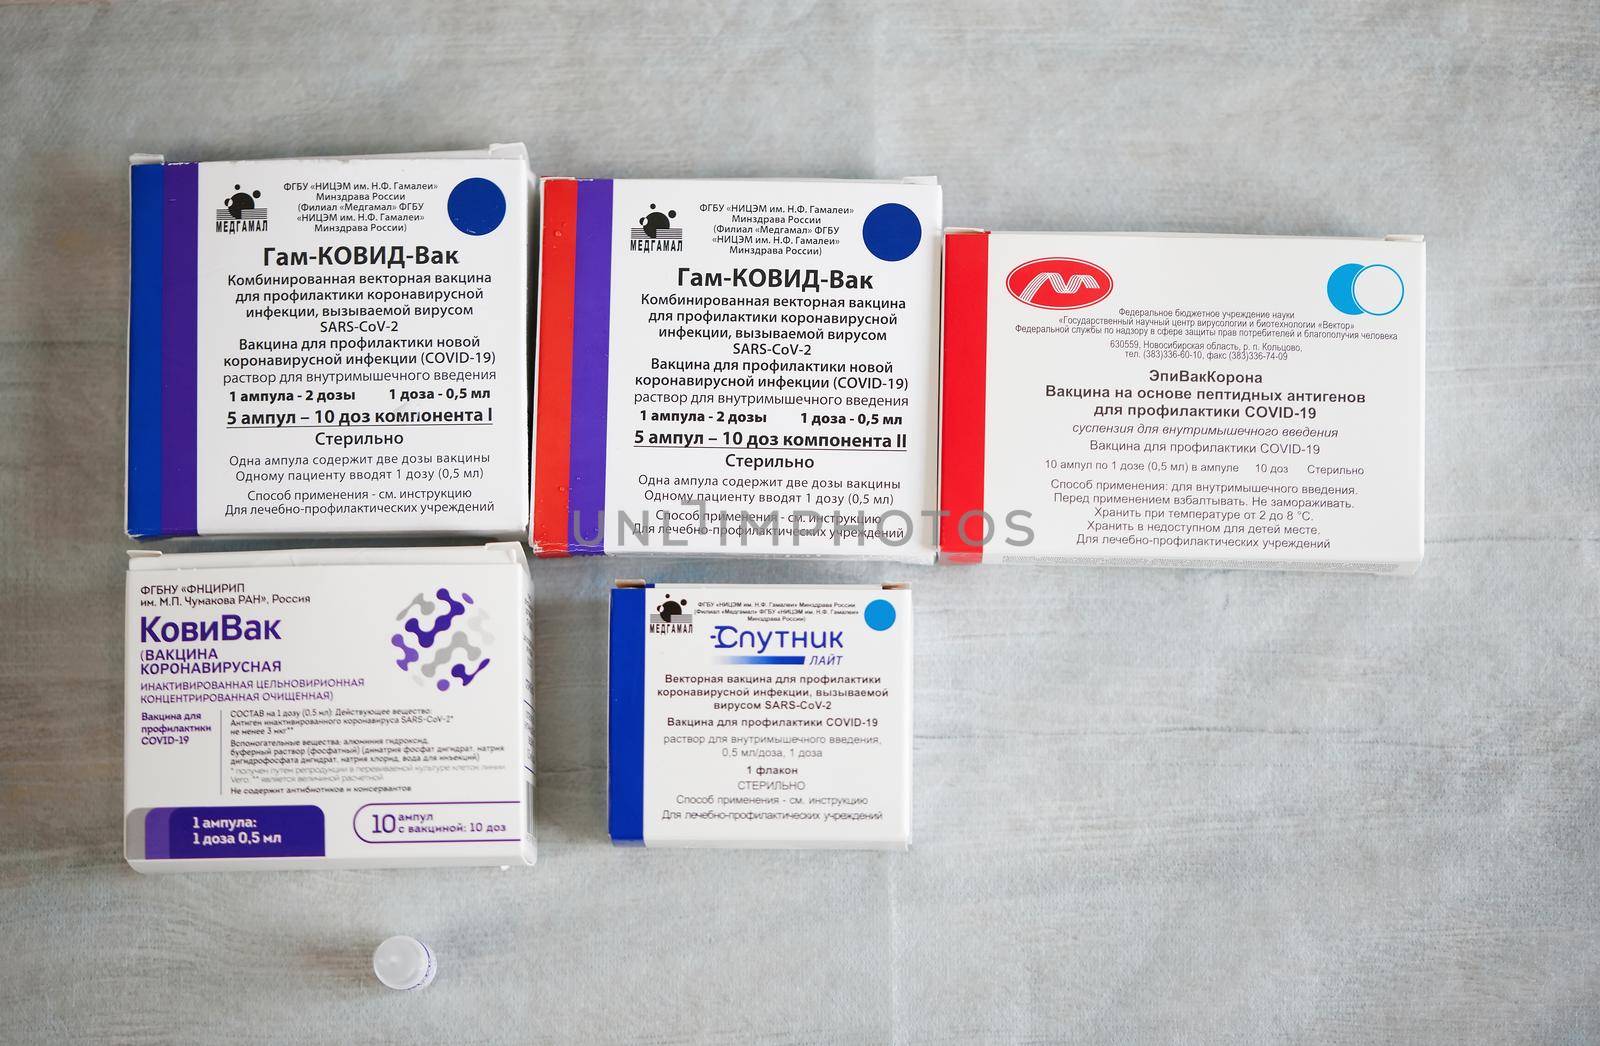 All Russian-made coronavirus vaccines, on one table. Vaccine for prevention COVID-19. 26.08.2021, Moscow, Russia.